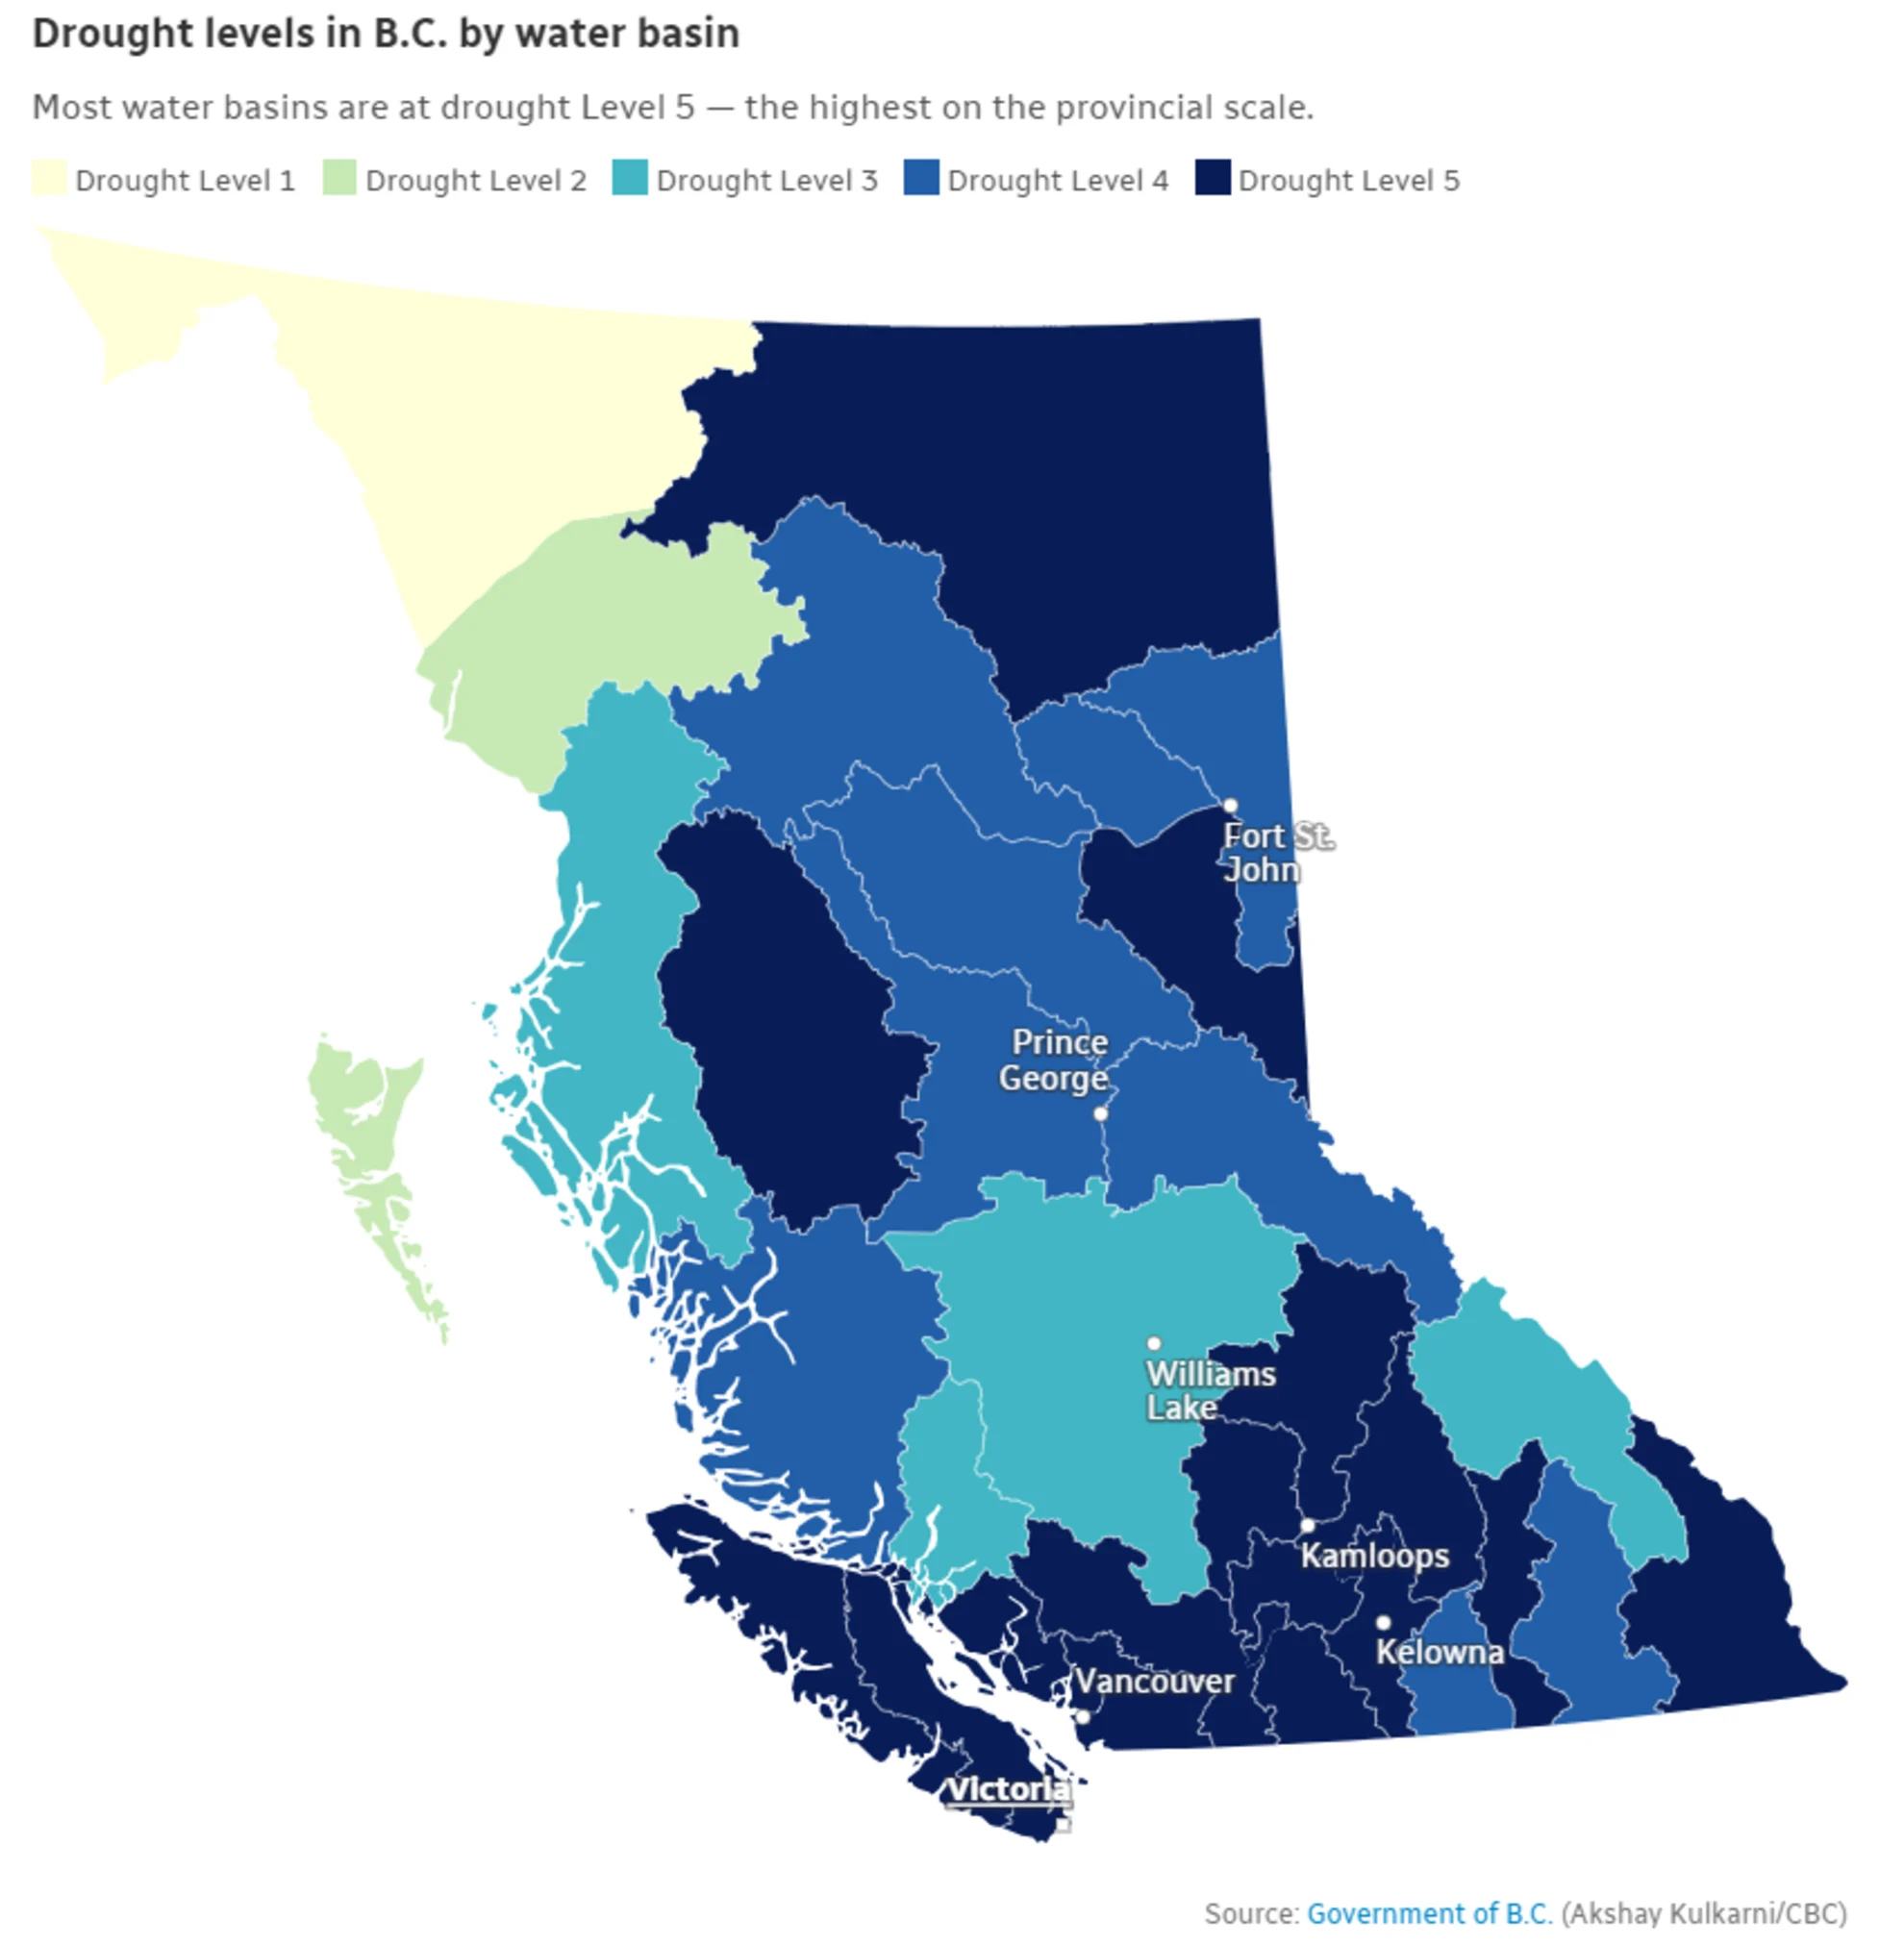 CBC - Drought levels in BC - Government of BC - Sept11